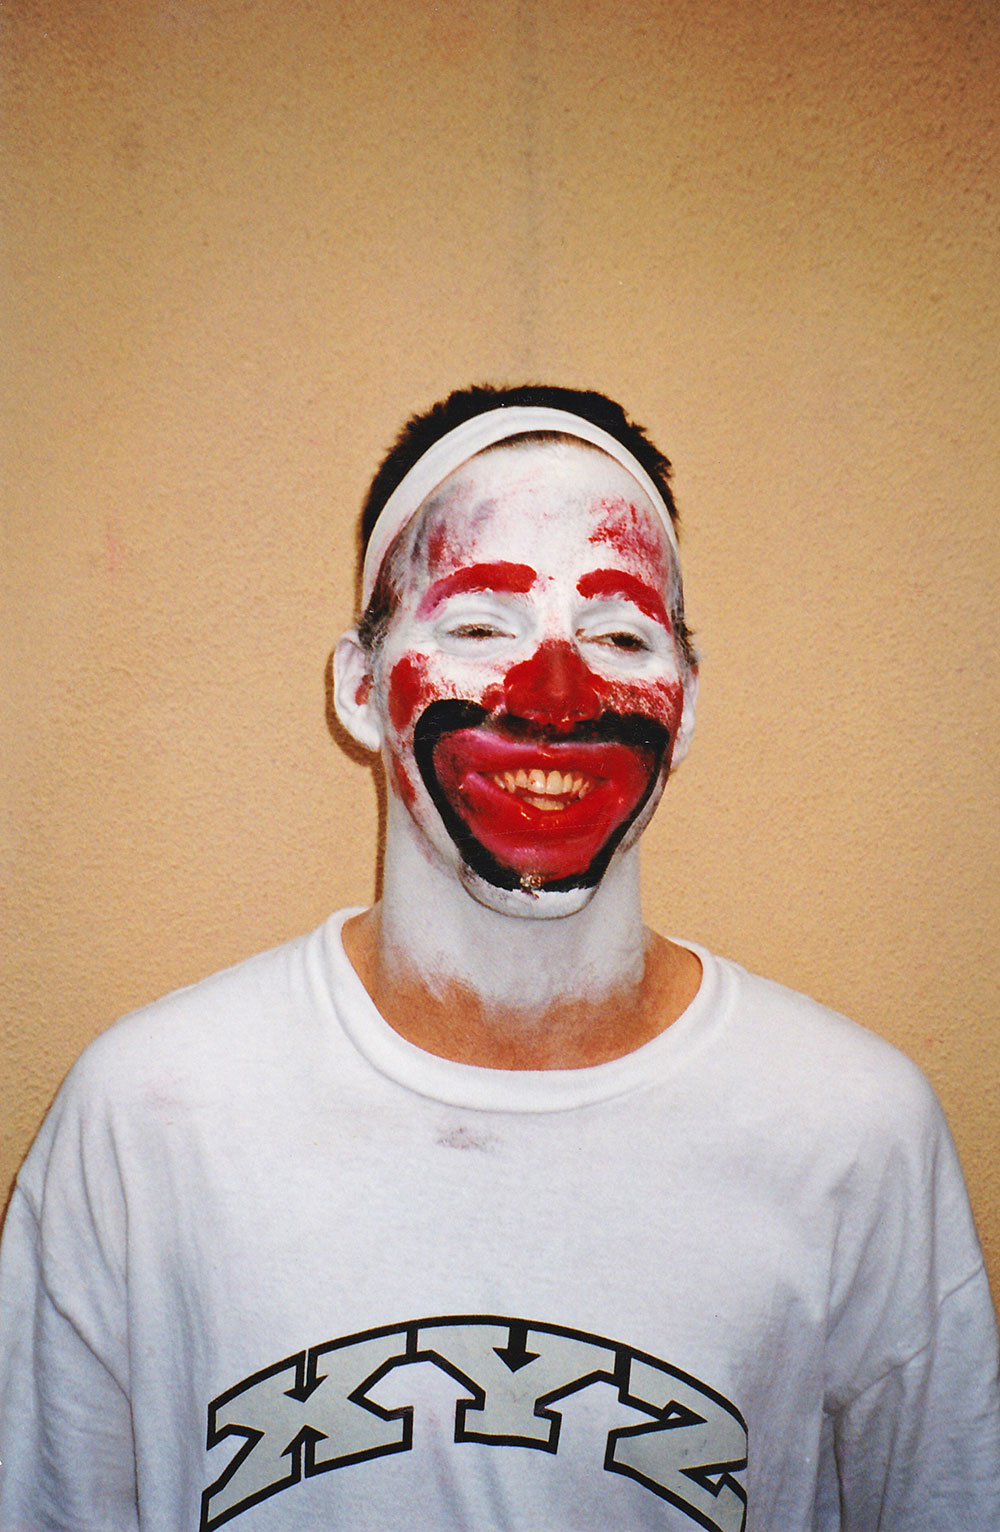 picture of Steve-O's first attempt at clown makeup. A man wearing a white tshirt with the letters XYZ has white, red, and black paint all over his face. 